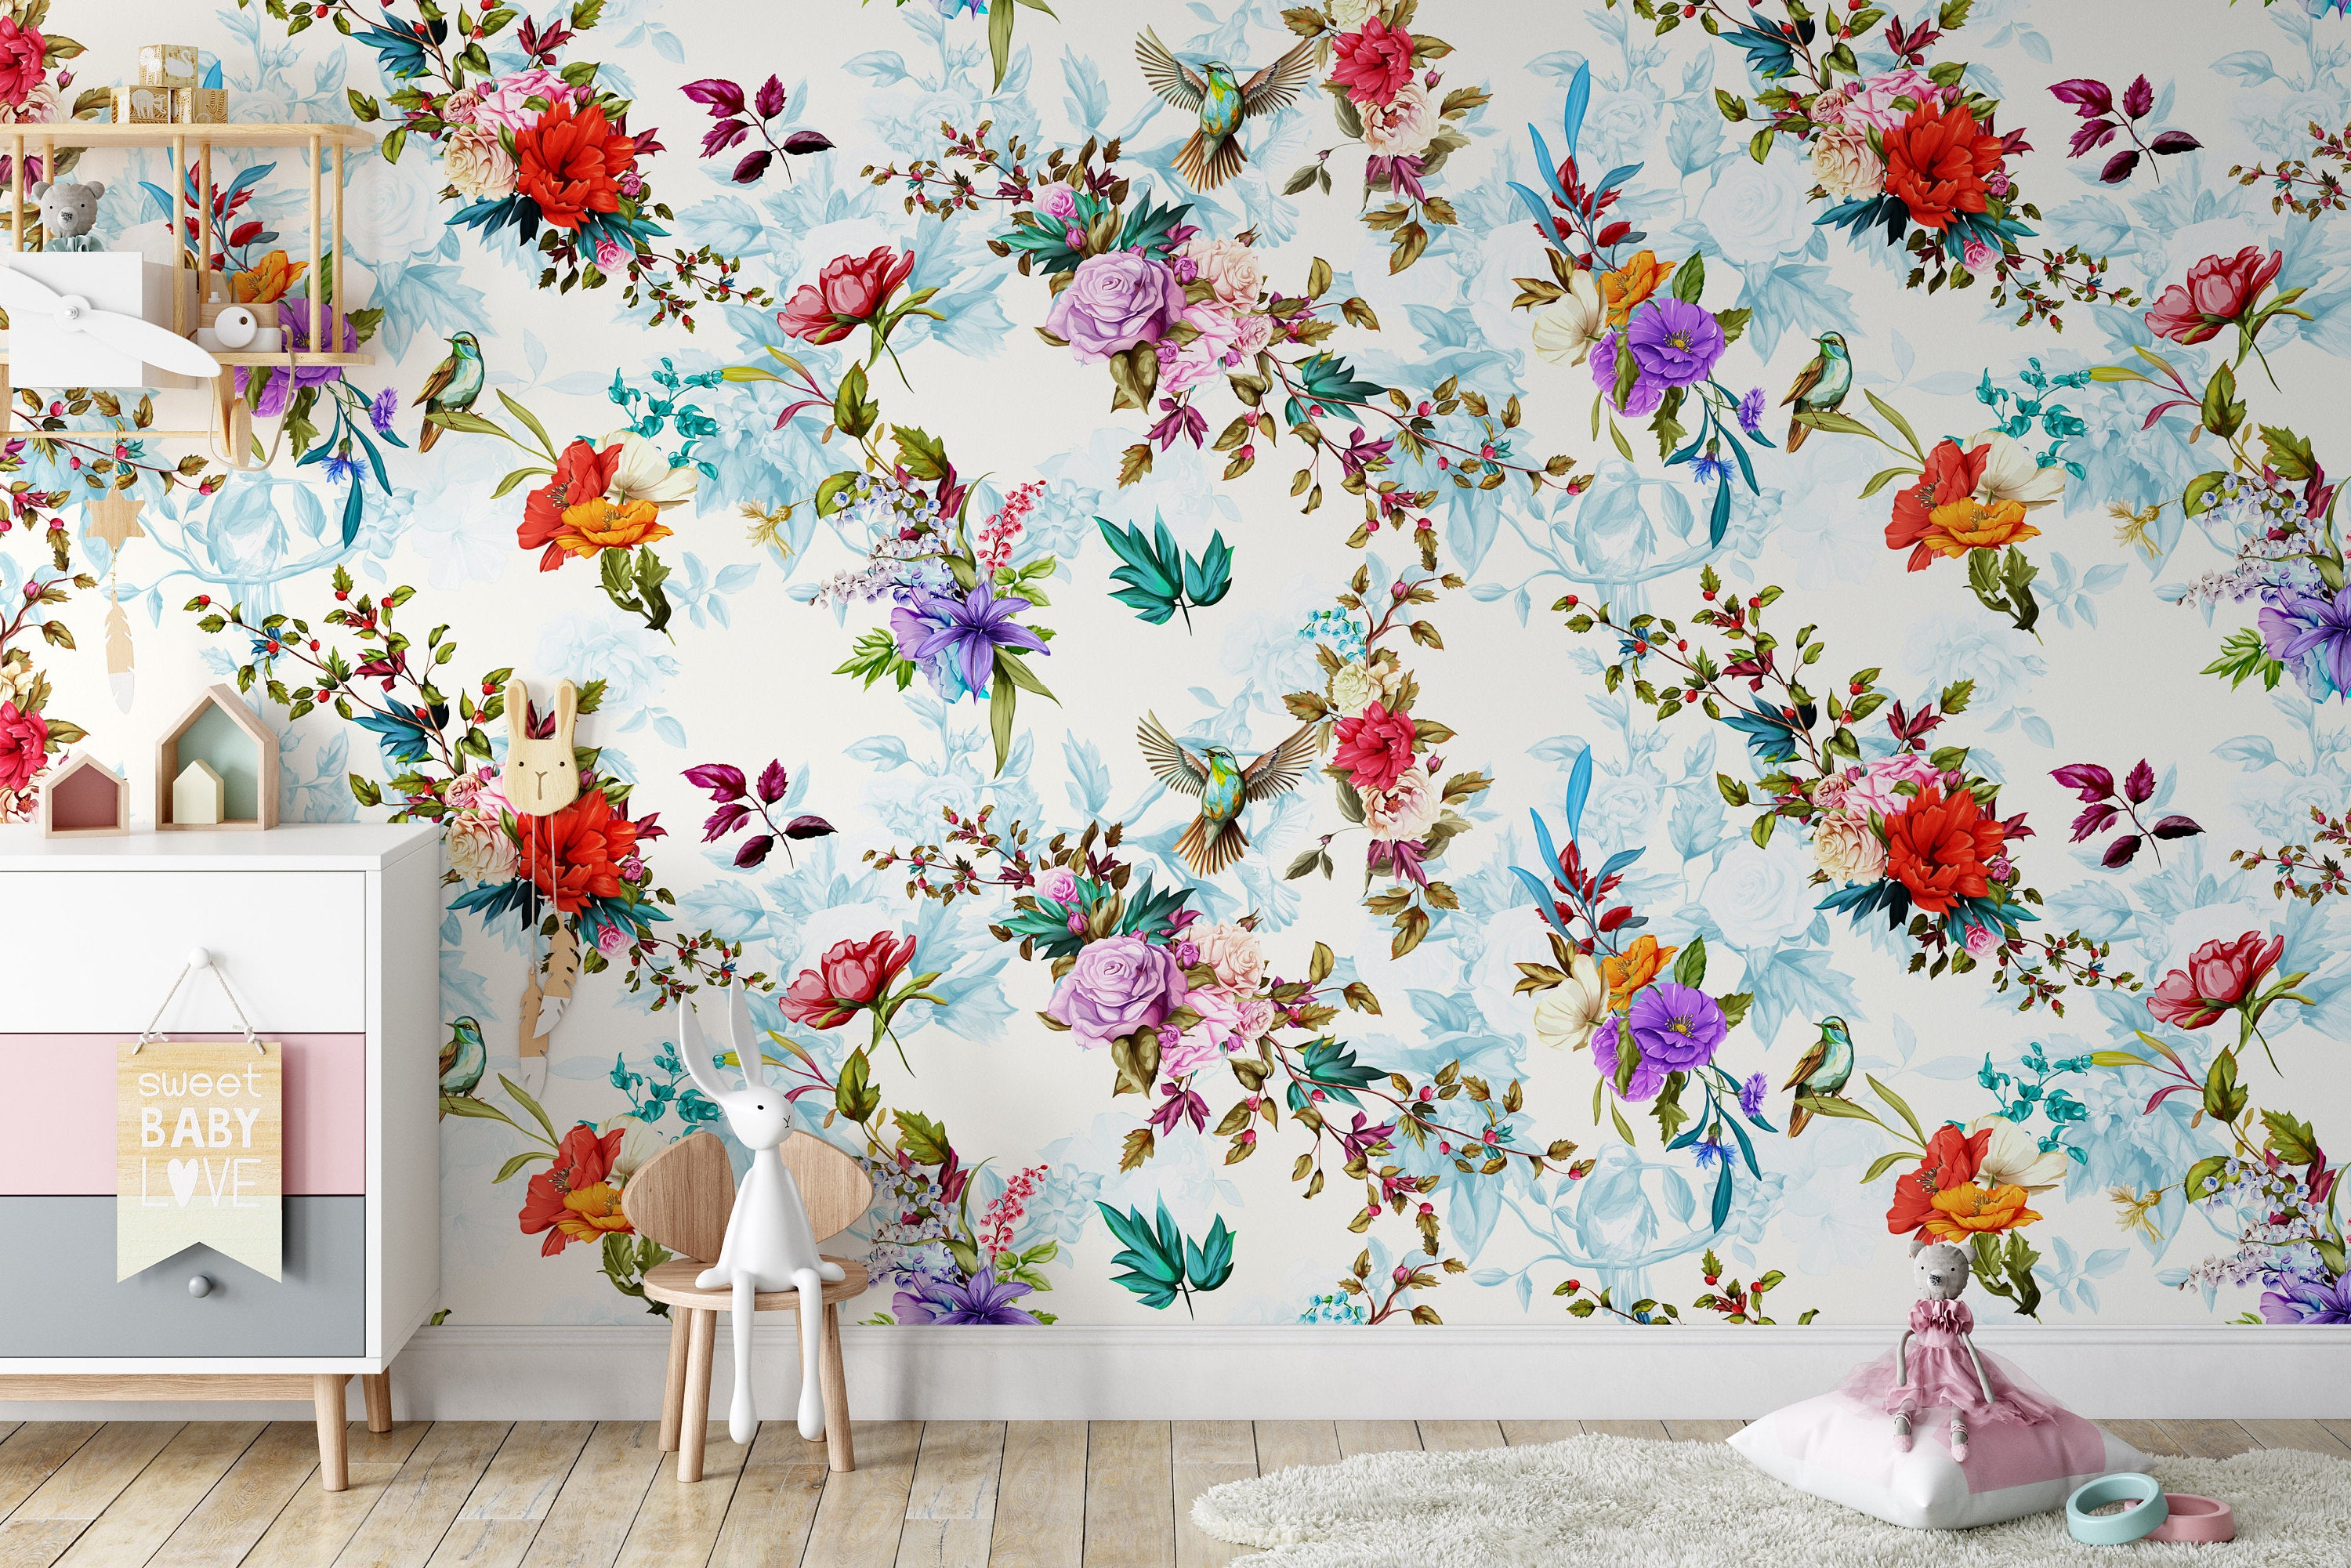 Colorful Roses Modern Background Wallpaper Self Adhesive Peel and Stick Wall Sticker Wall Decoration Minimalistic Scandinavian Removable